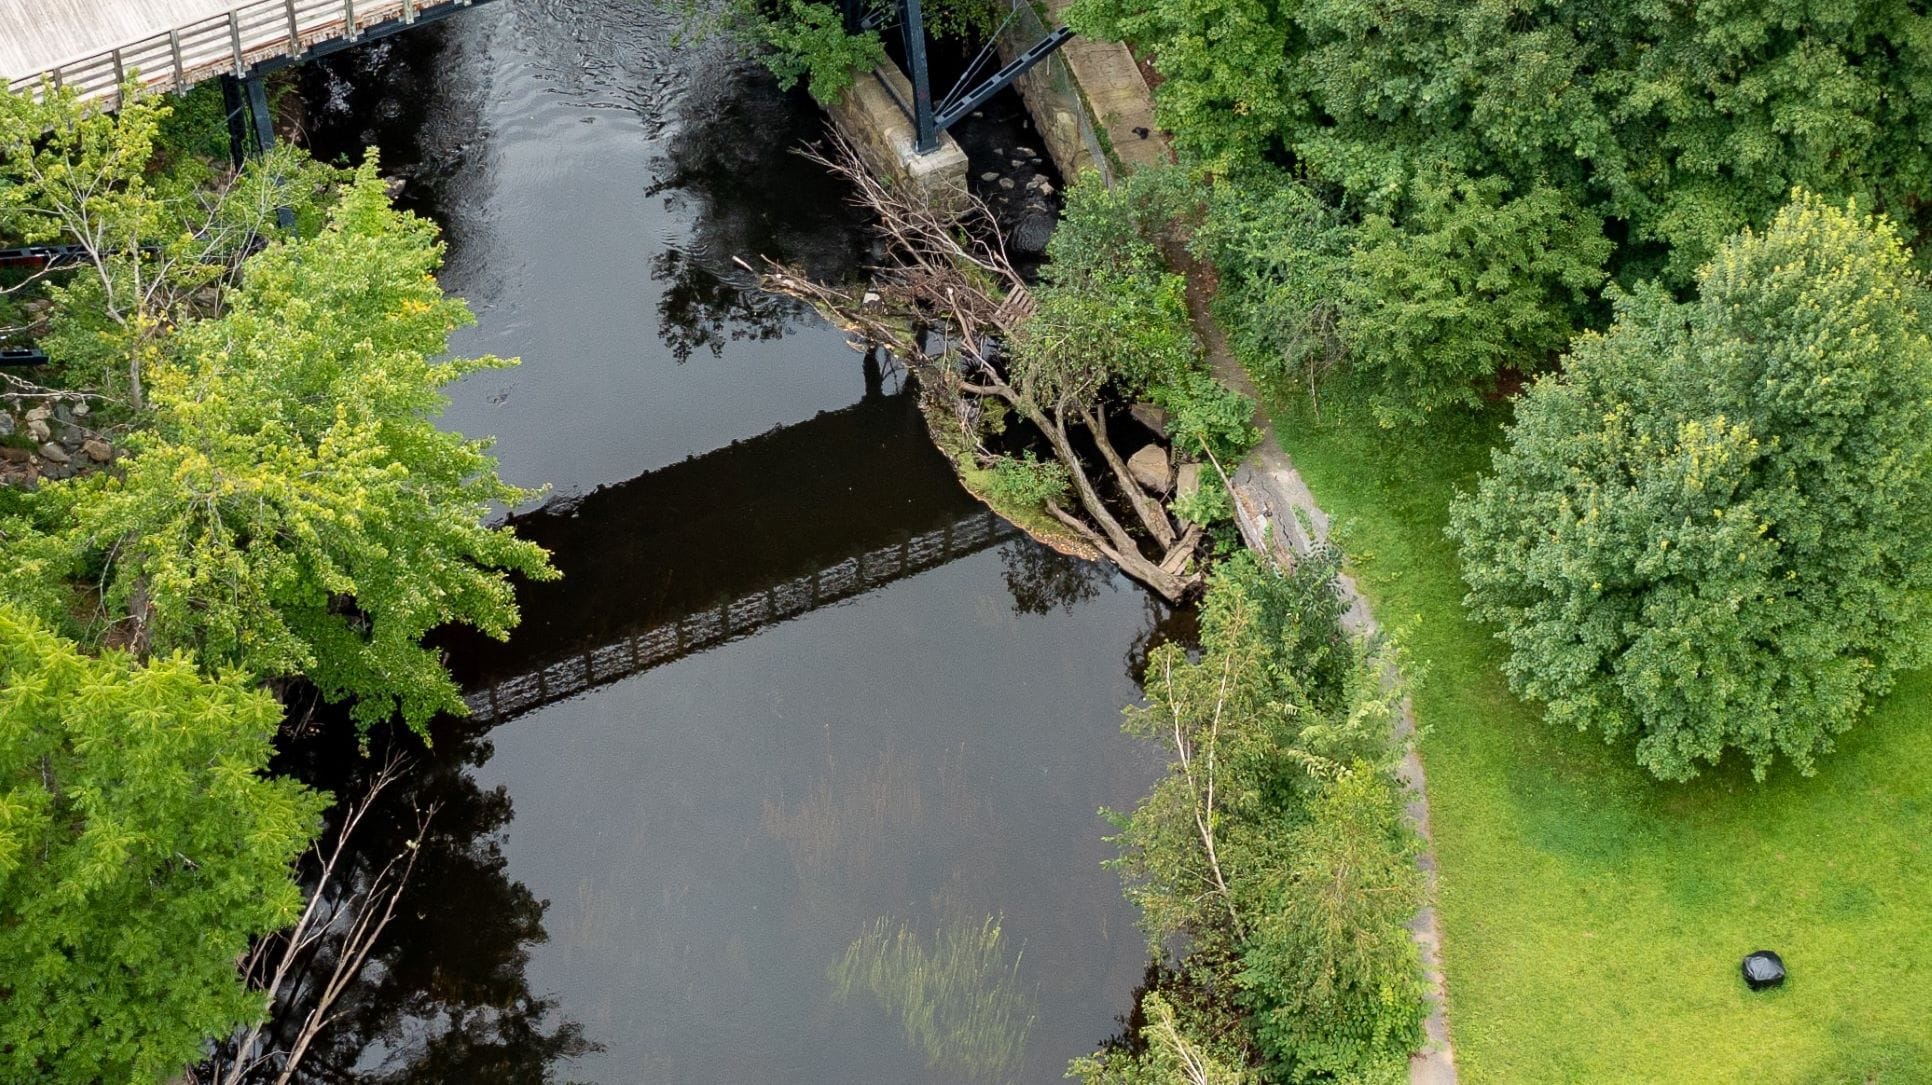 The historic walkway between Houghton and Mason Street remained closed last month, two years after part of the walkway crumbled into the nearby Assabet River. Photo/Tami White